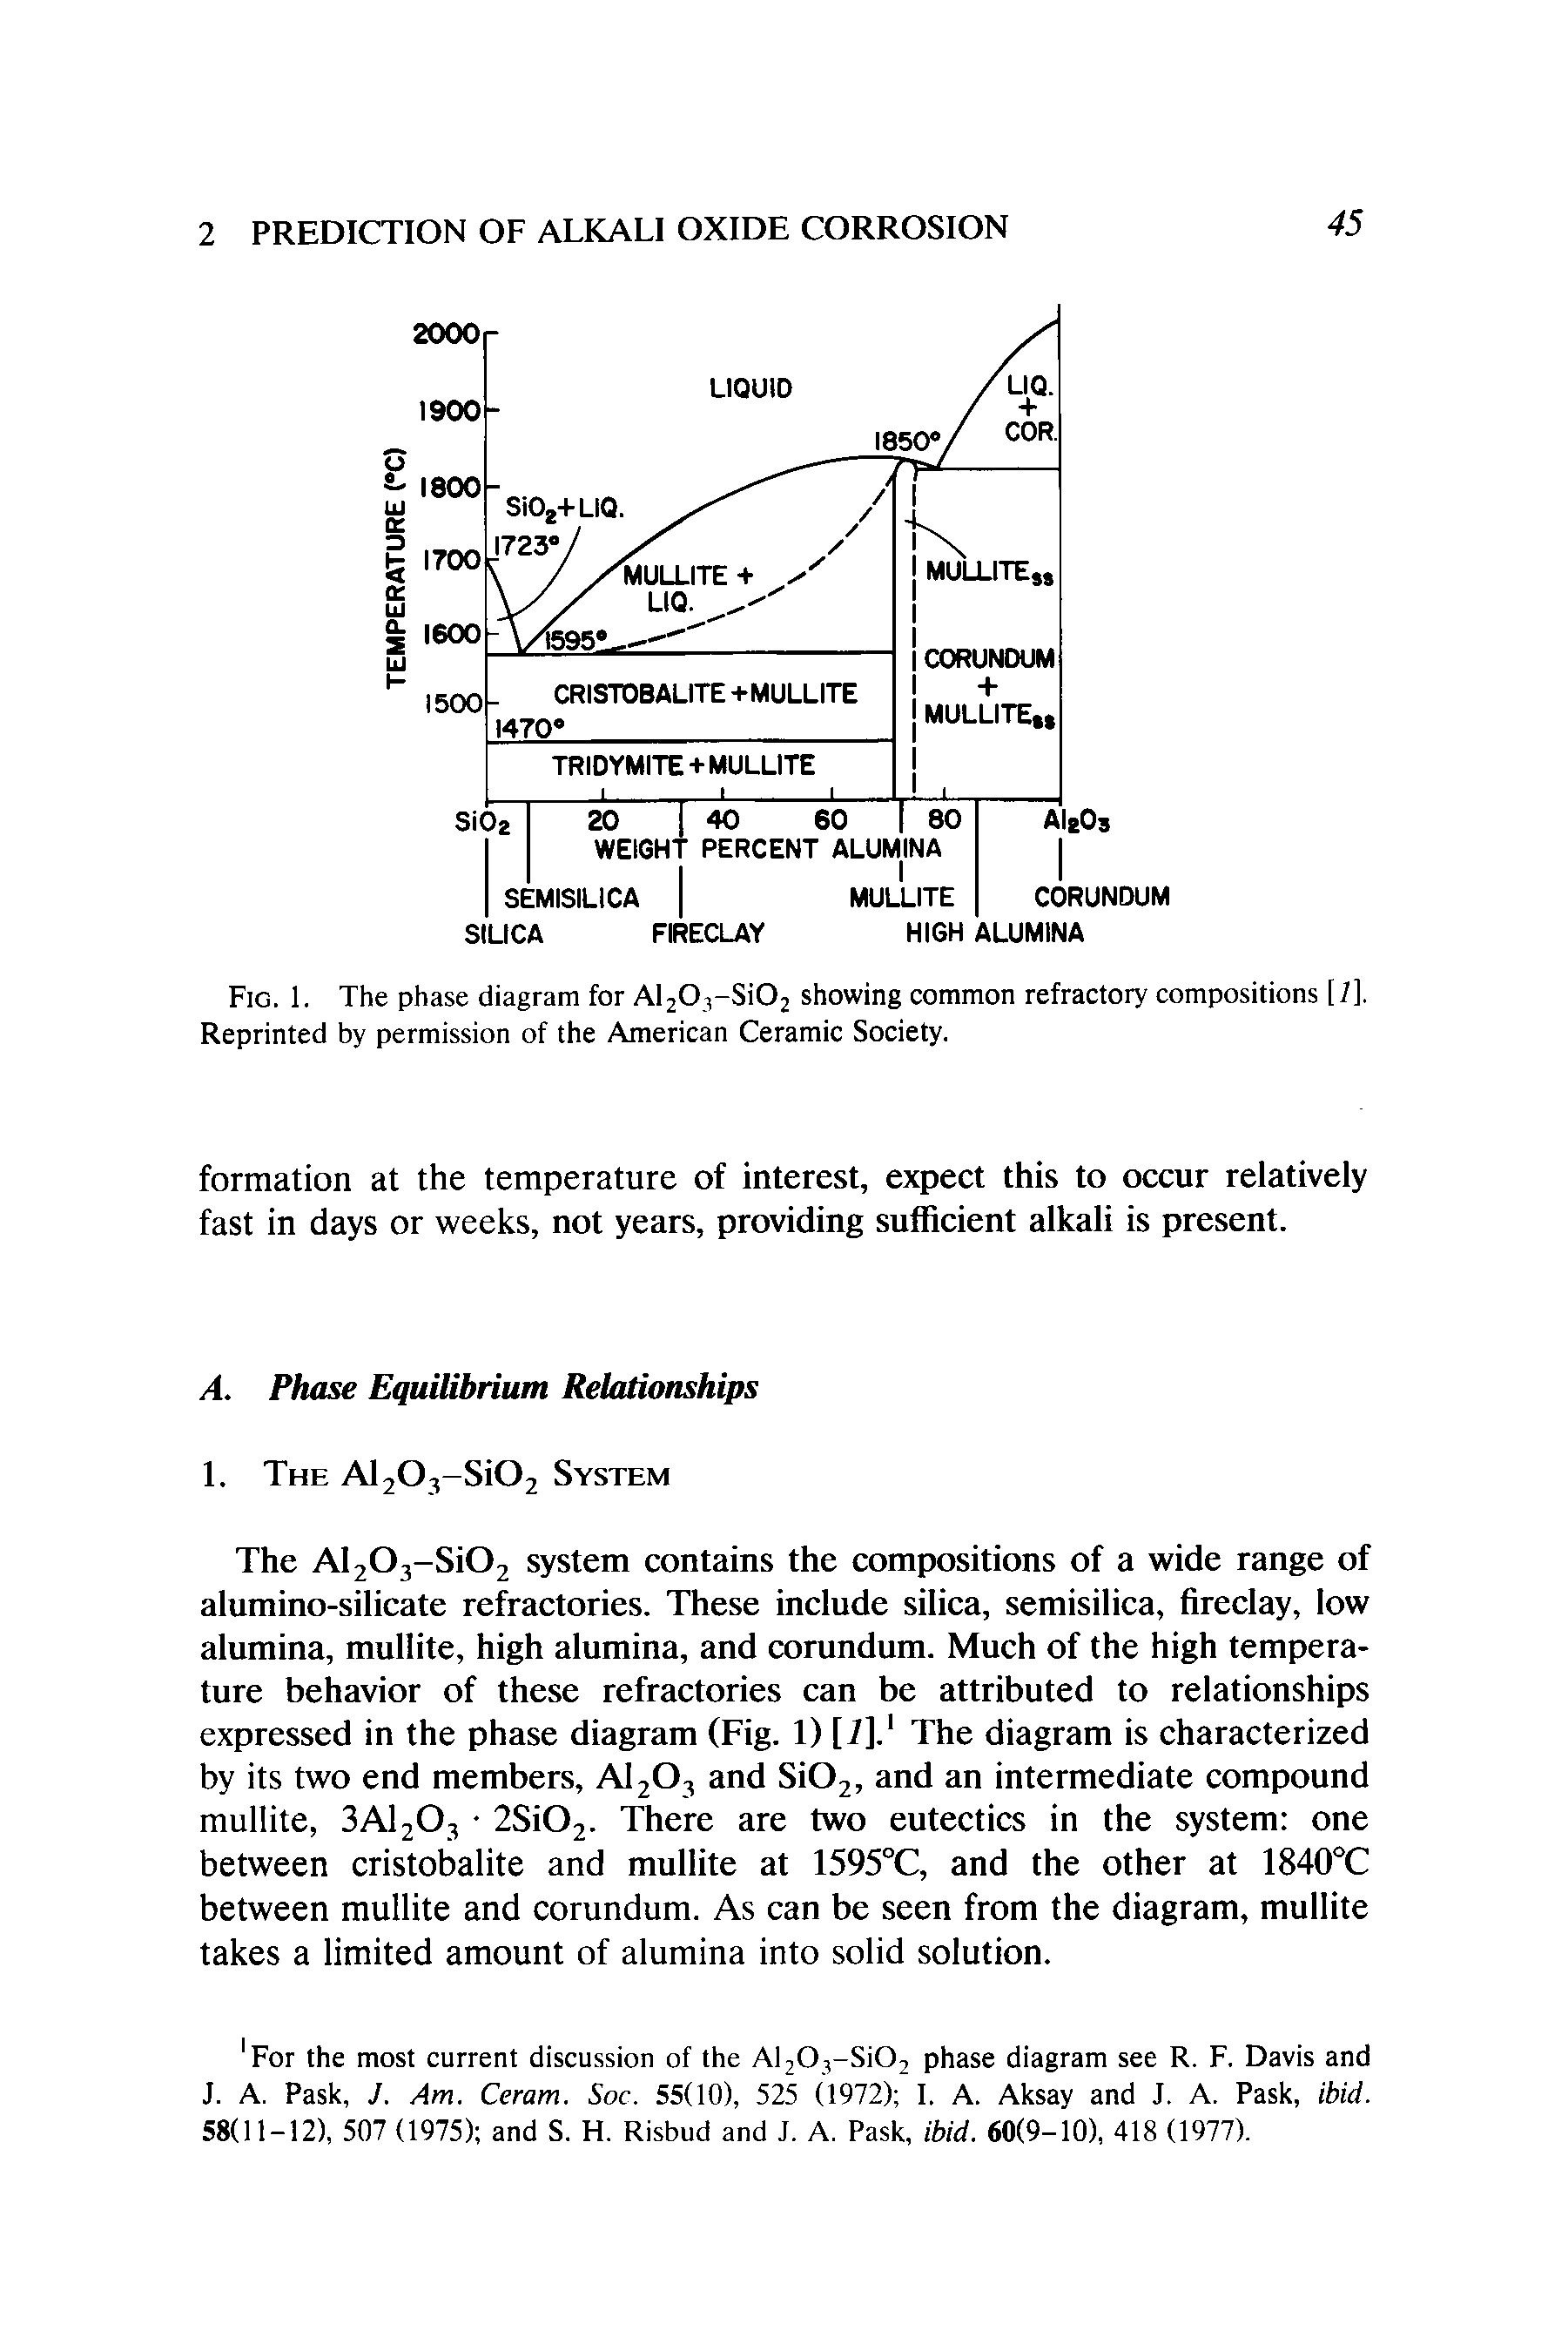 Fig. 1. The phase diagram for Al20,-Si02 showing common refractory compositions [7], Reprinted by permission of the American Ceramic Society.